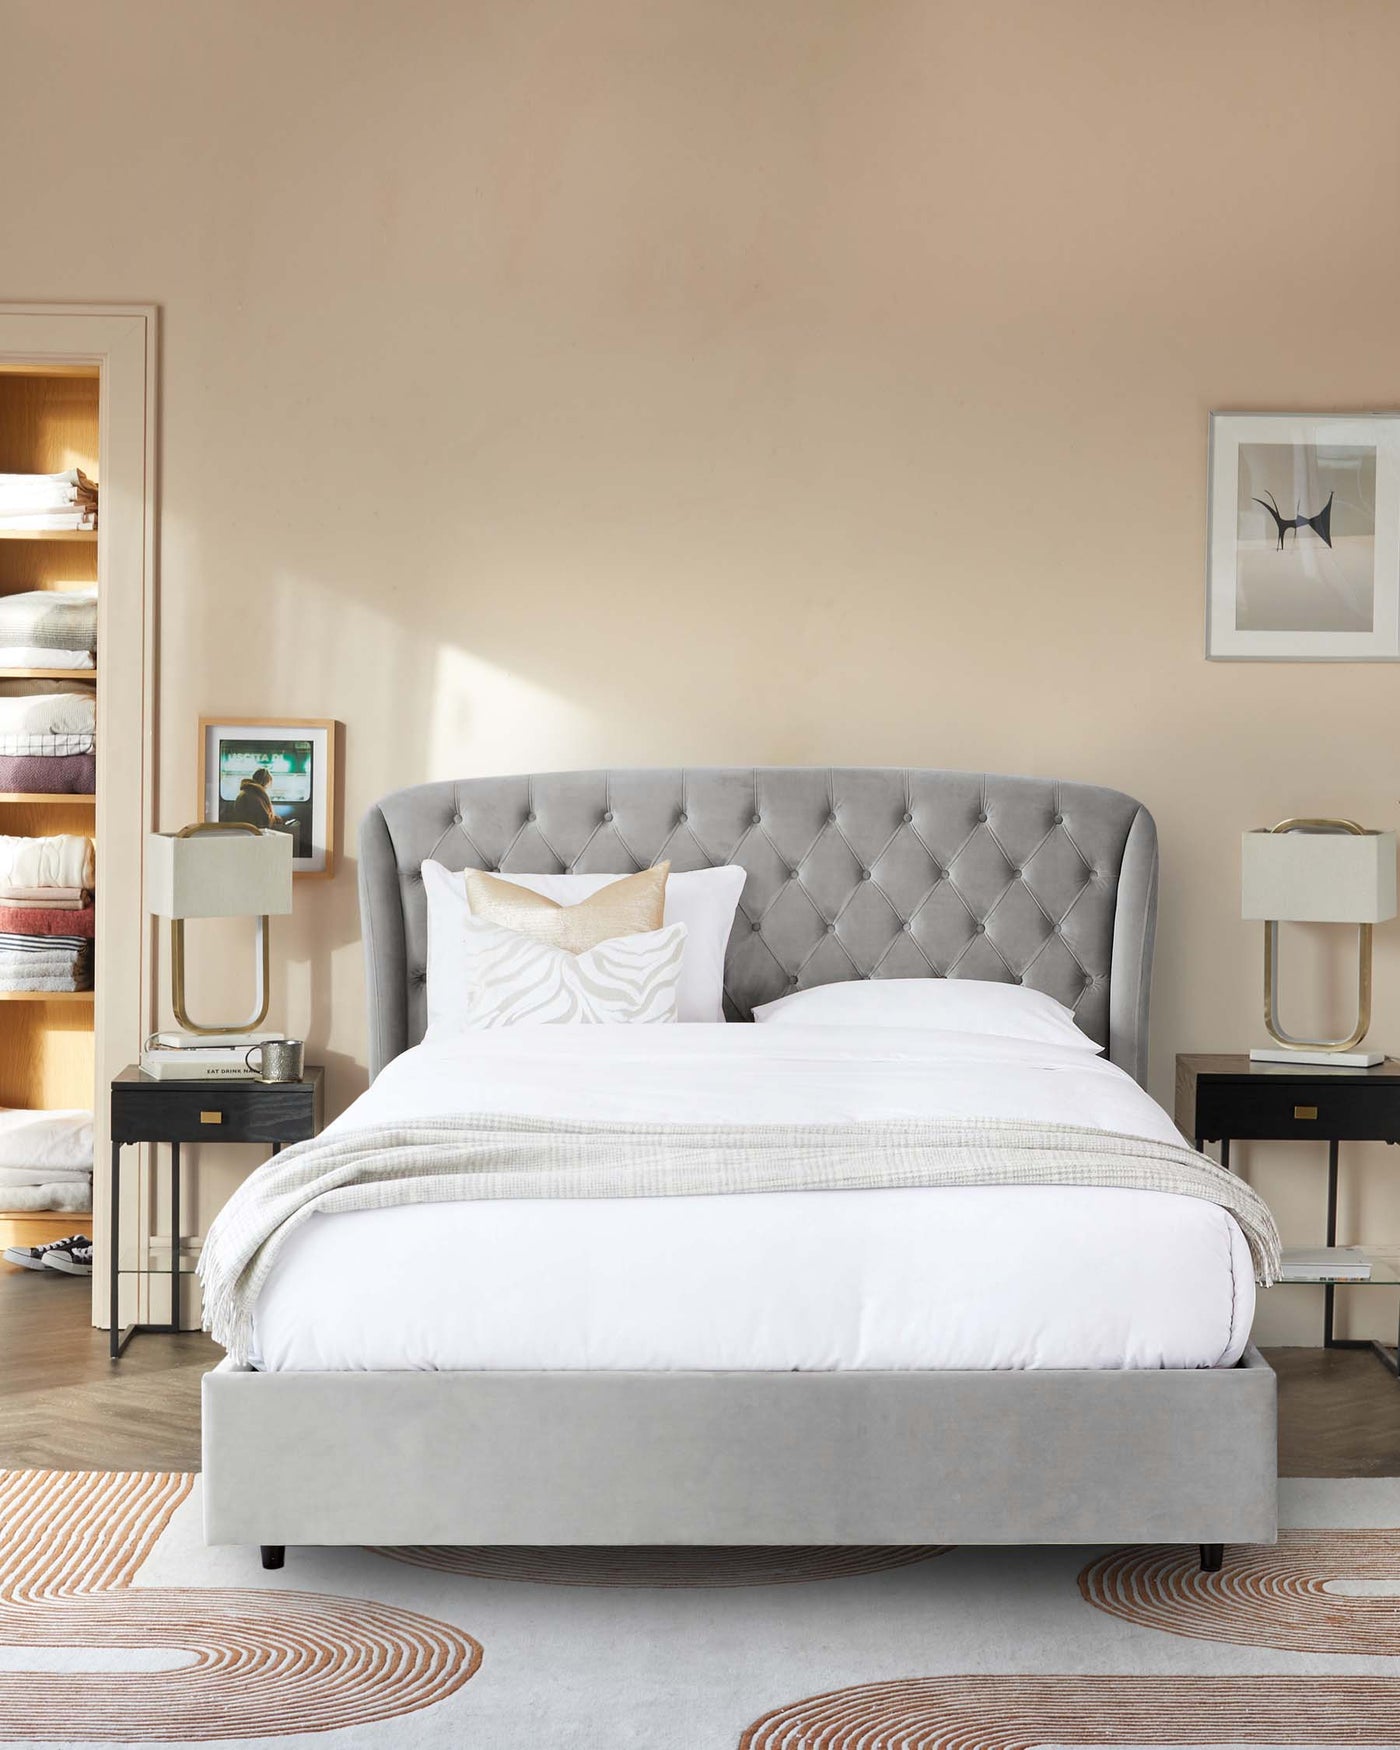 Elegant bedroom furniture display featuring a grey upholstered queen-size bed with a tufted headboard, paired with two black nightstands with a drawer and lower shelf. Each nightstand is adorned with a table lamp having a ceramic base and a cylindrical cream shade. The bed is dressed in white linens, accented by a decorative throw and pillow with subtle patterns. A soft-patterned area rug anchors the space, and the background includes a framed artwork and an open closet stocked with neatly arranged linens.